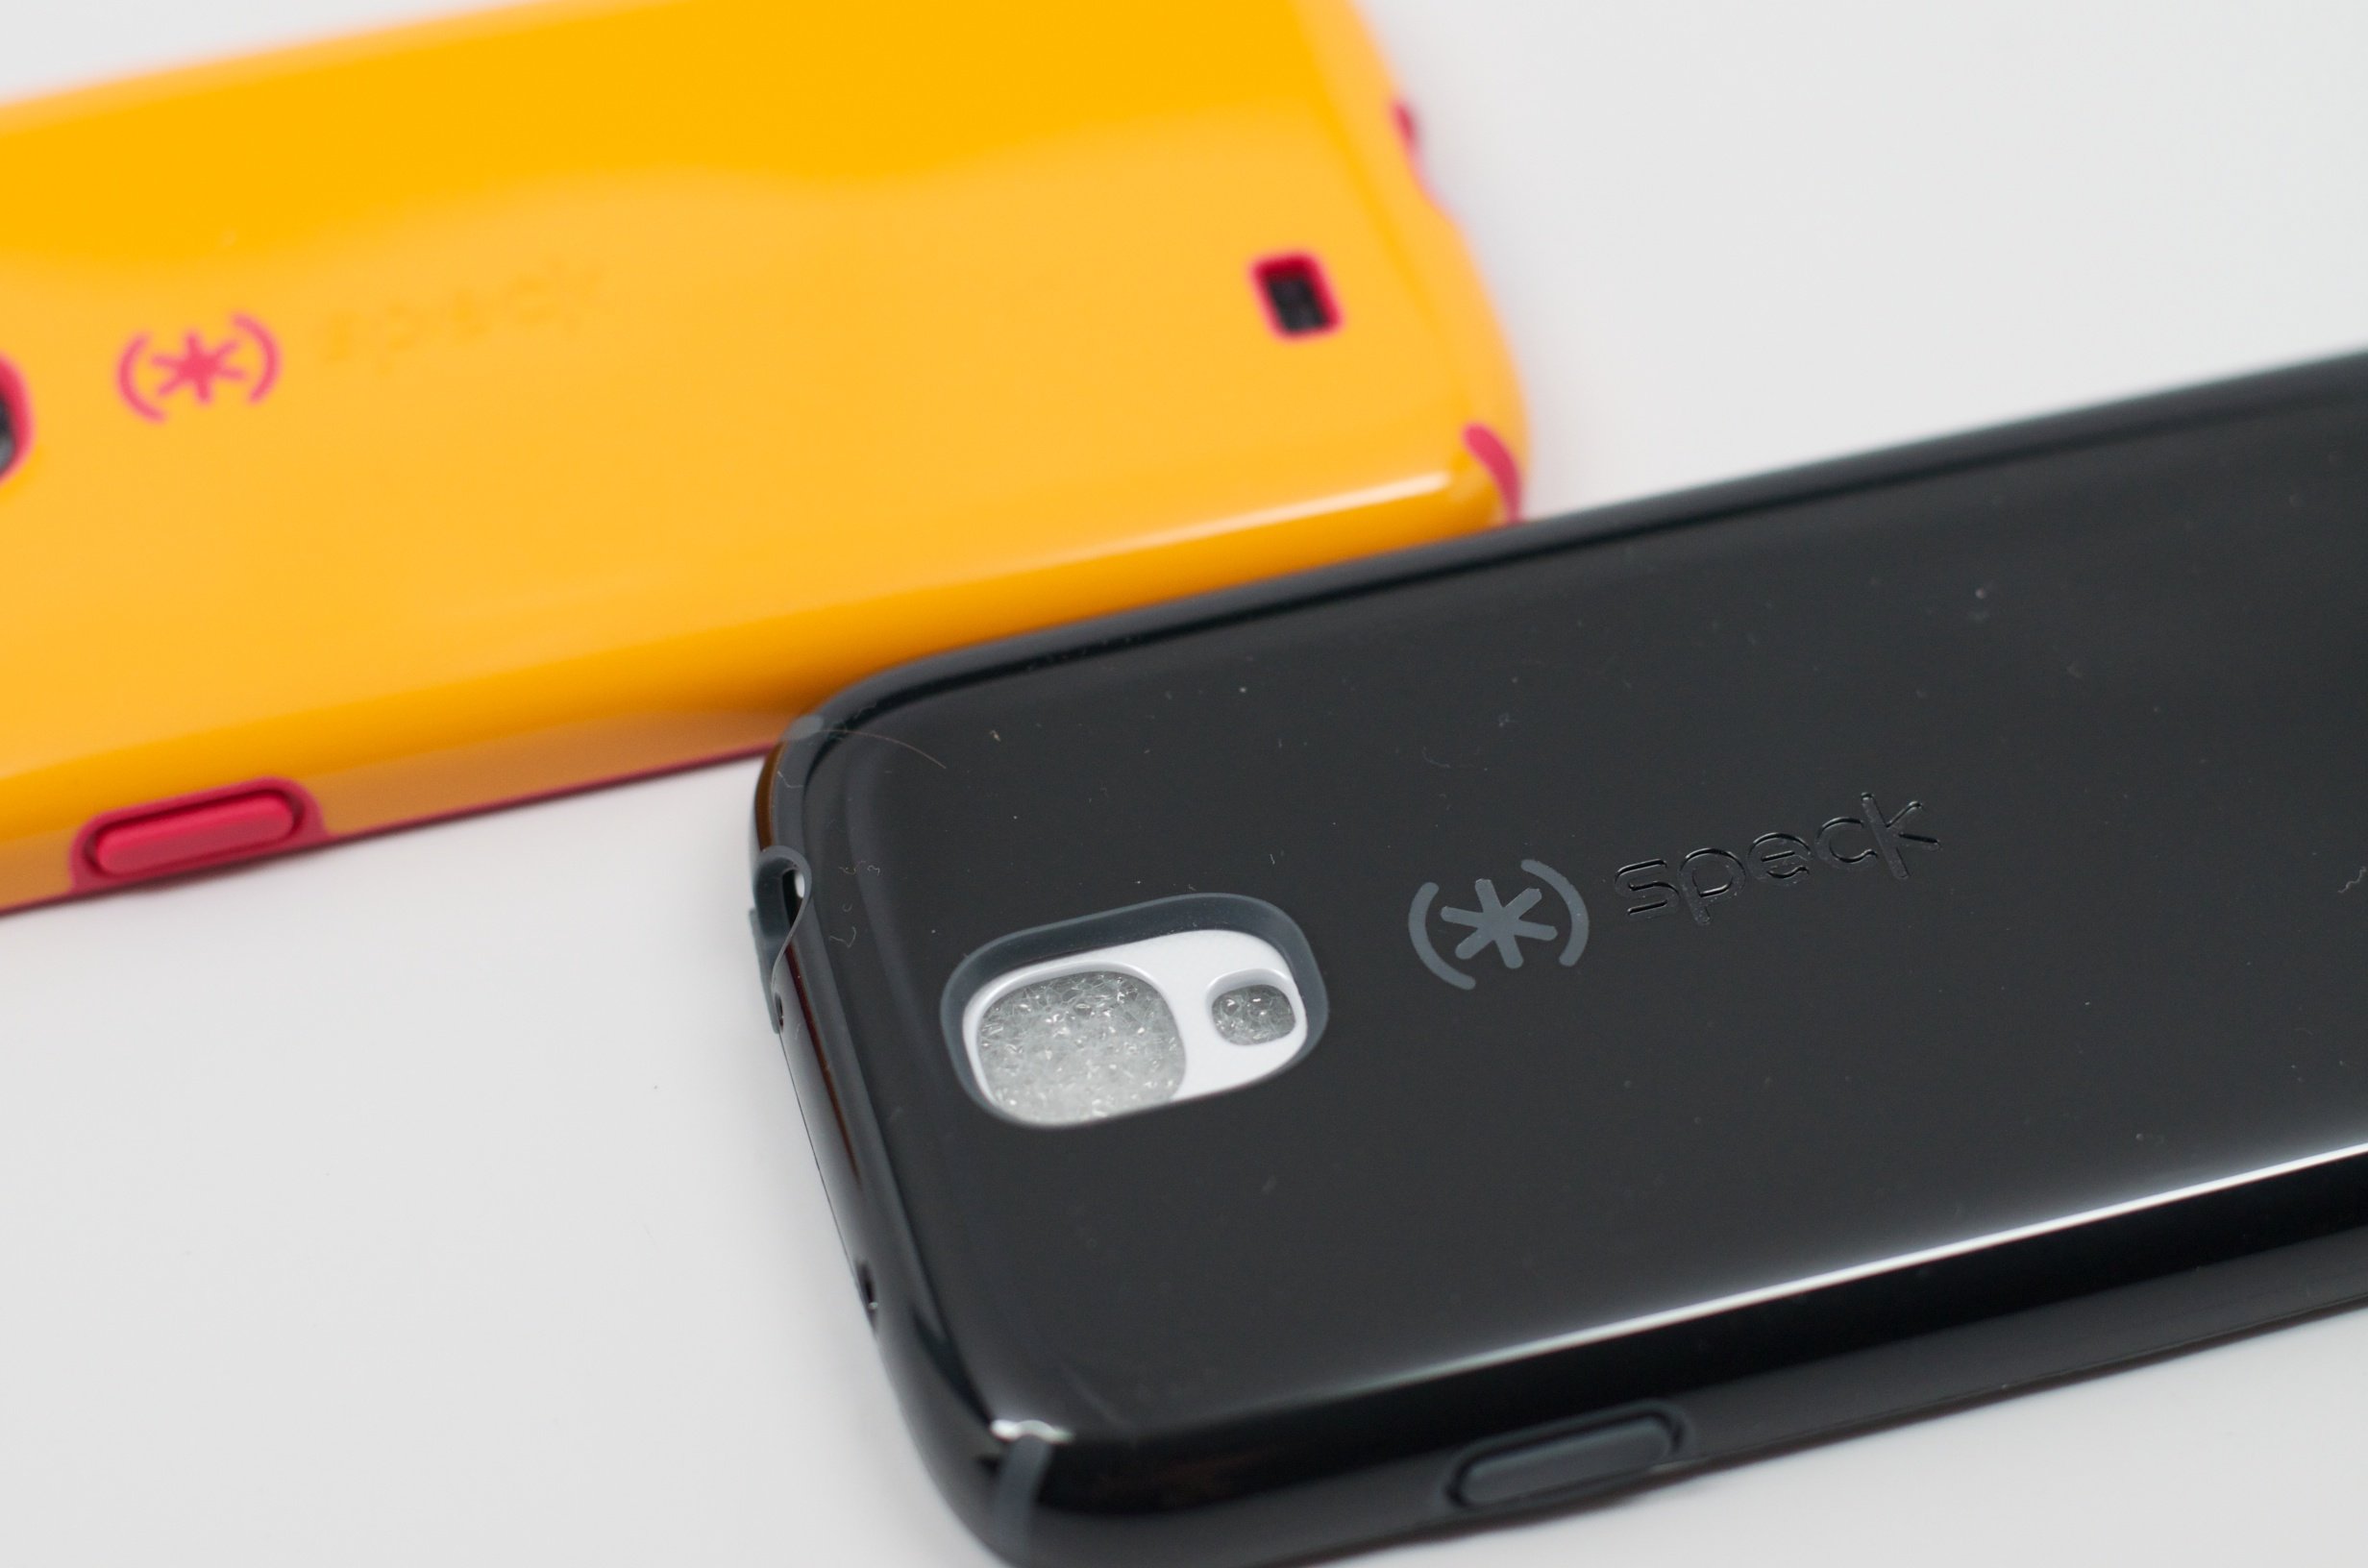 Speck includes openings for the Galaxy S4 IR sensor and microphones and accents larger openings with a brighter color.